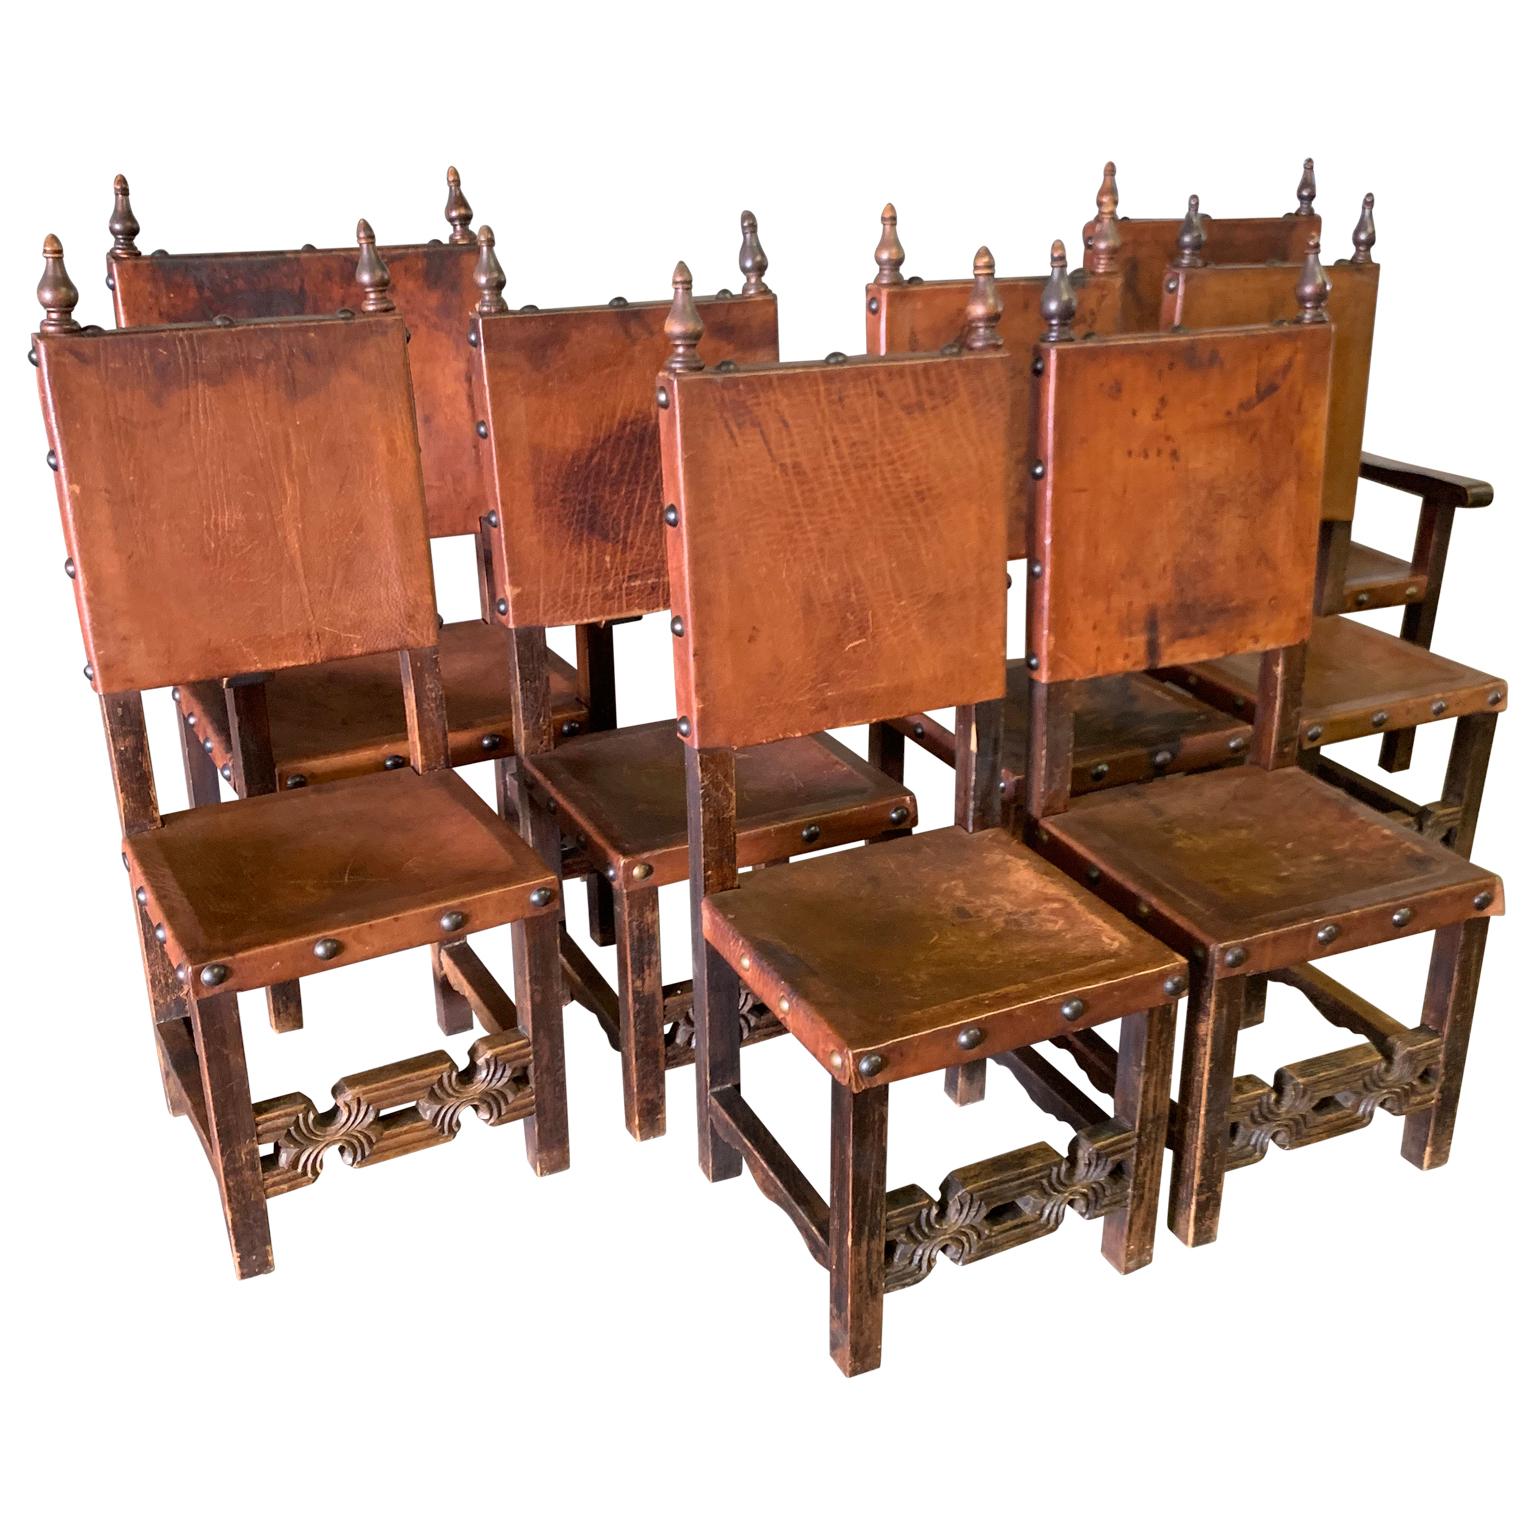 Set of 8 Baroque style leather dining room chairs
two armchairs and 6 dining room chairs.